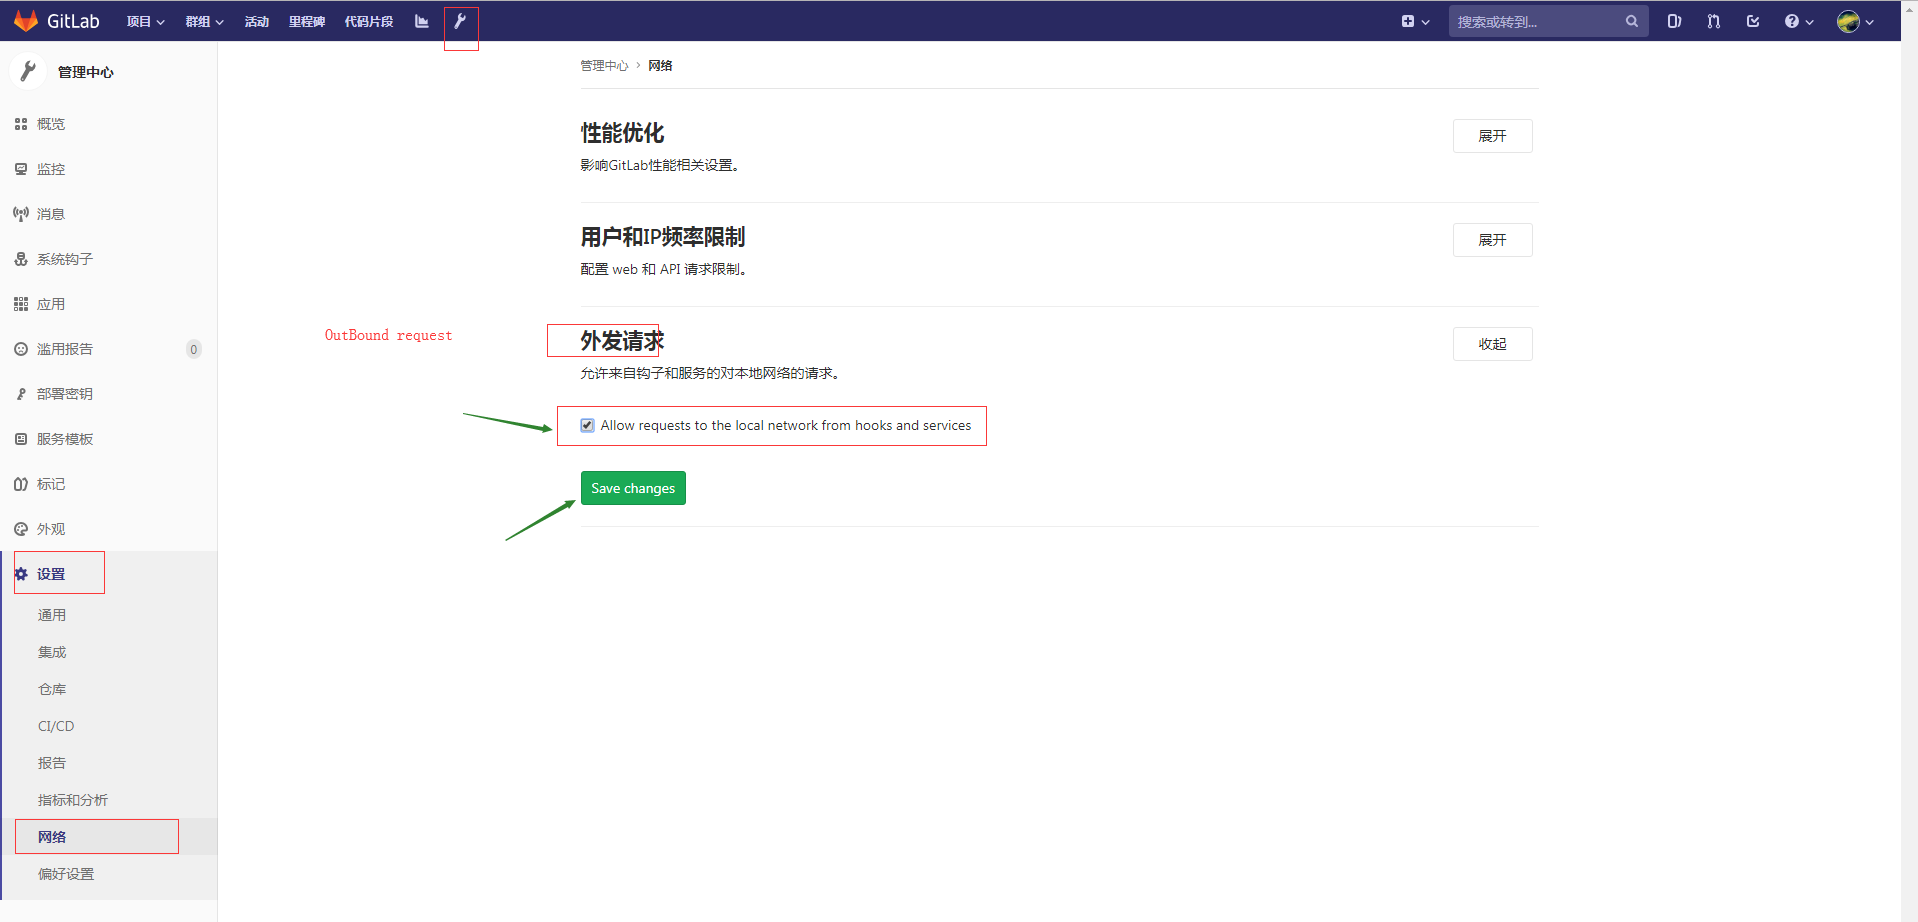 【GitLab】gitlab上配置webhook后，点击测试报错：Requests to the local network are not allowed第4张